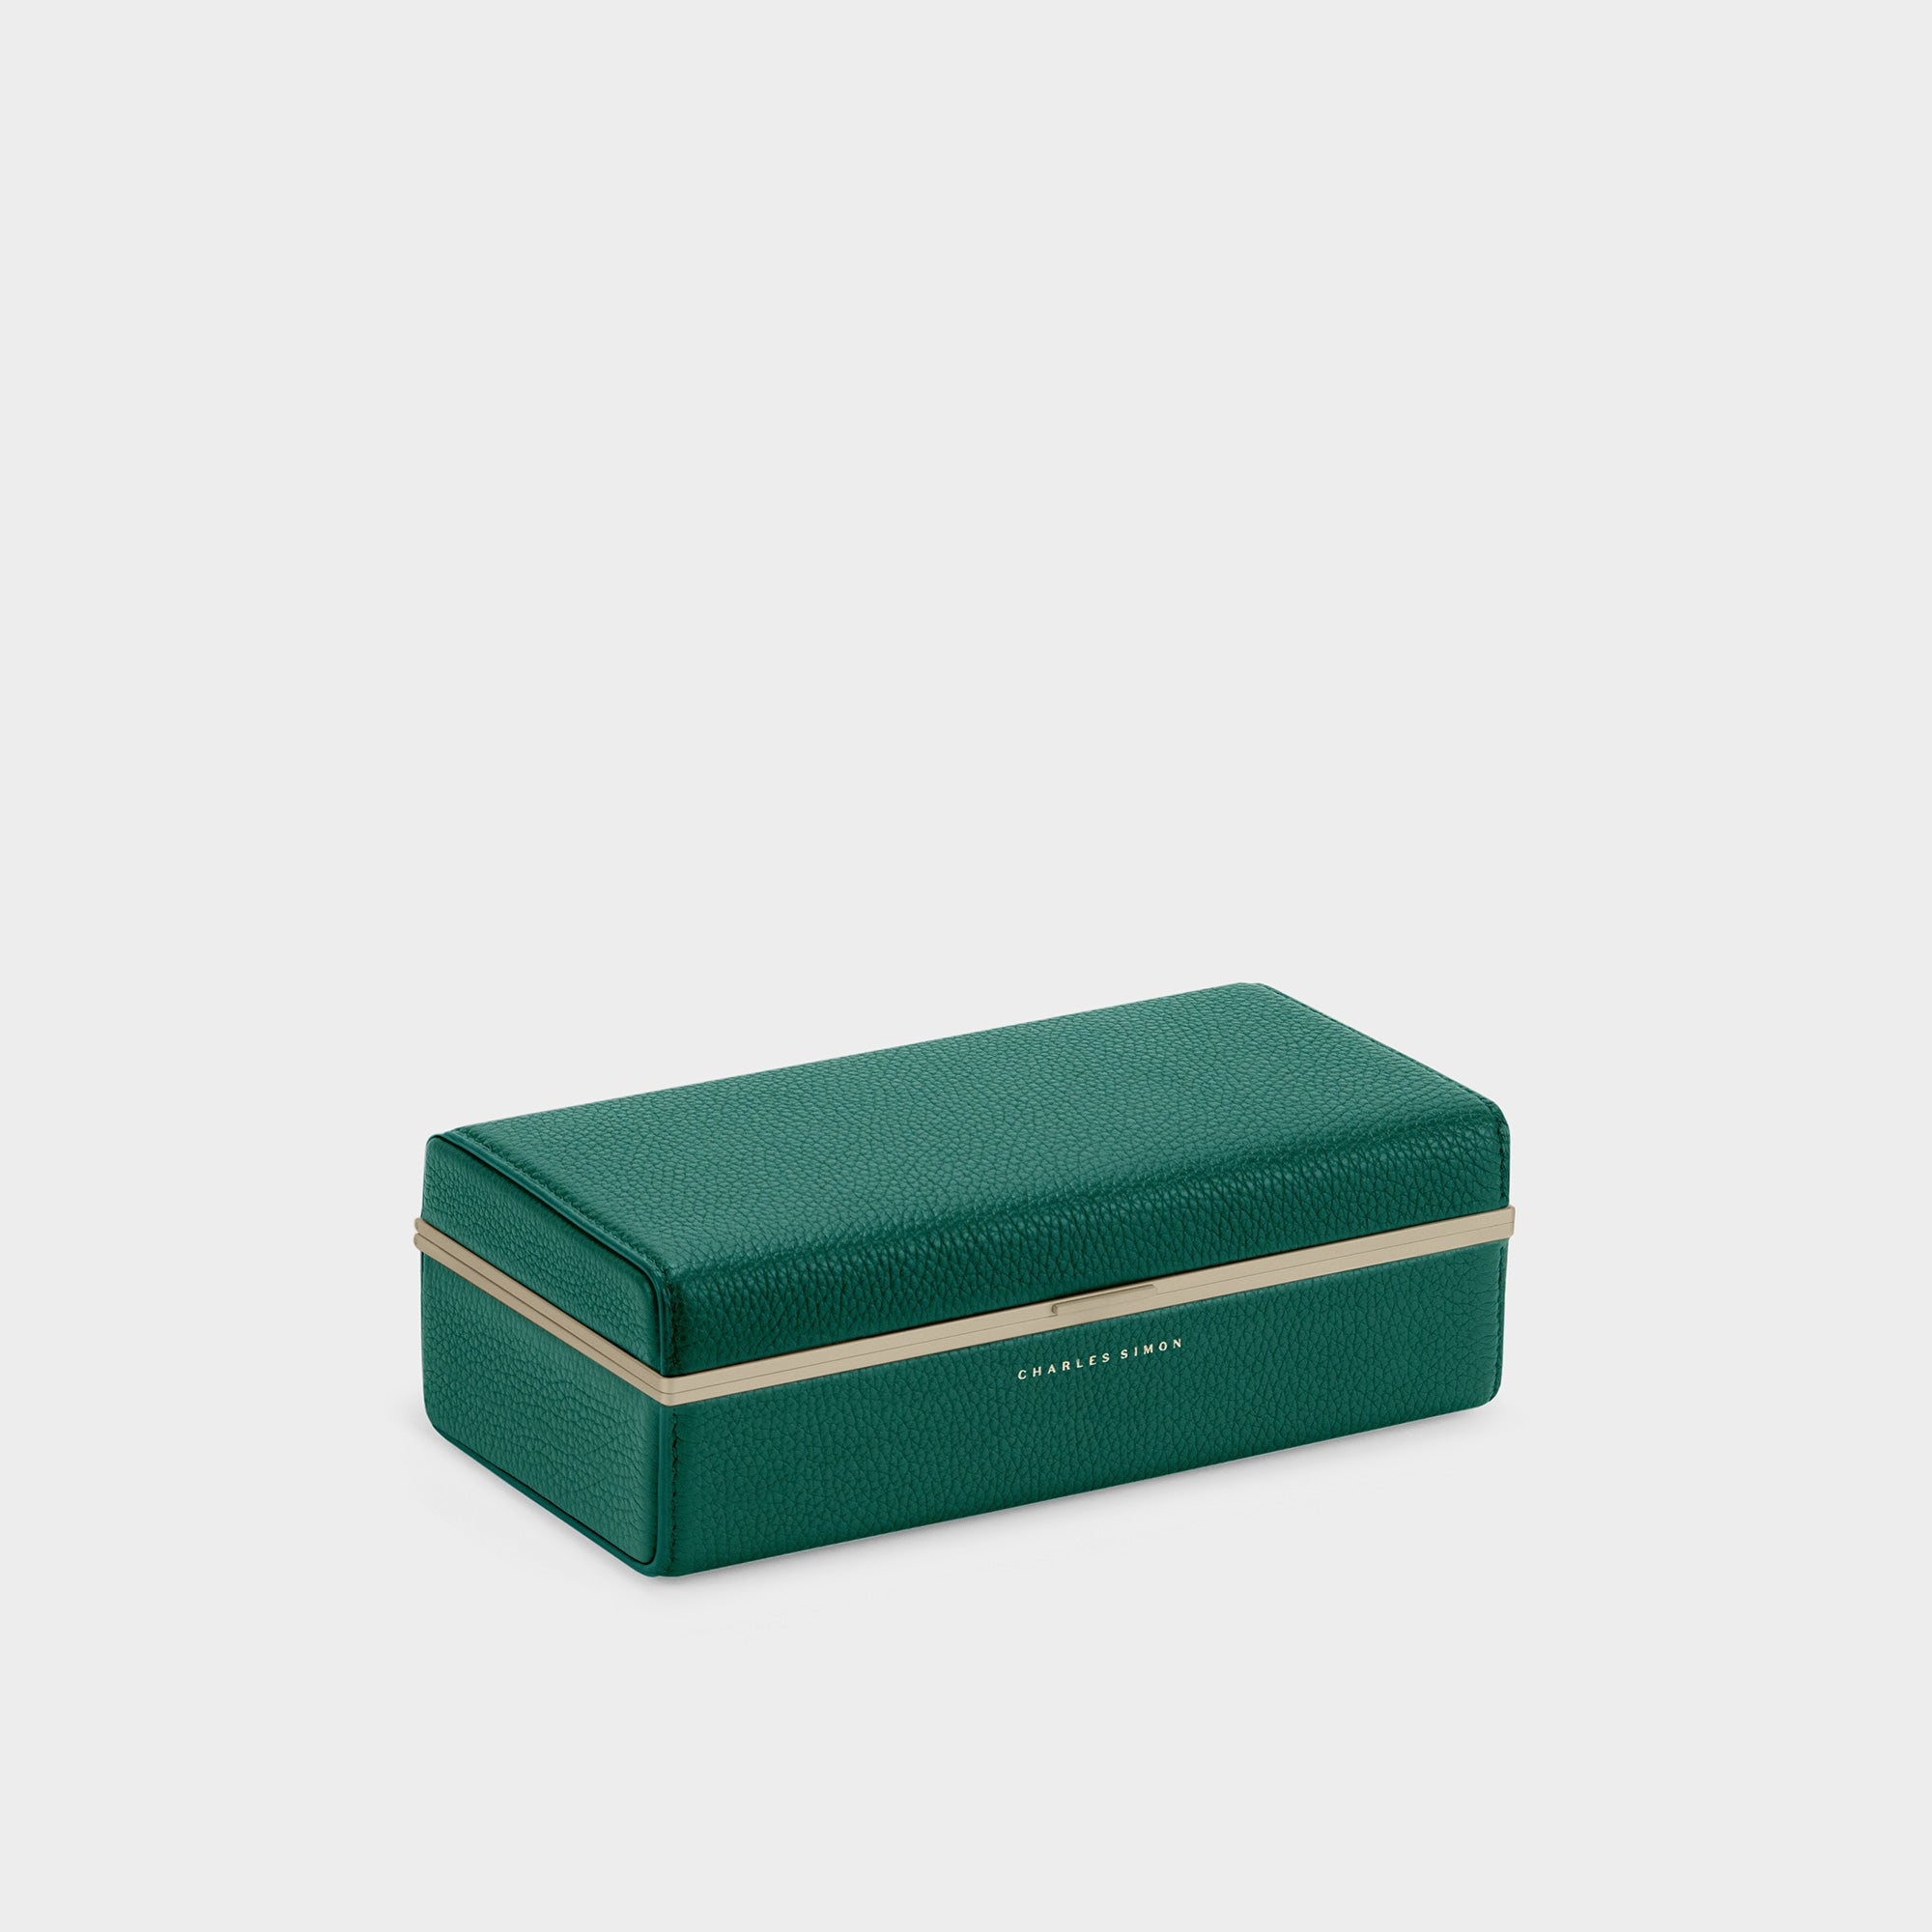 Product photo of closed emerald leather Eaton 3 Watch case from the Golden collection by Charles Simon. Handmade in Canada for a collection of up to 3 watches.